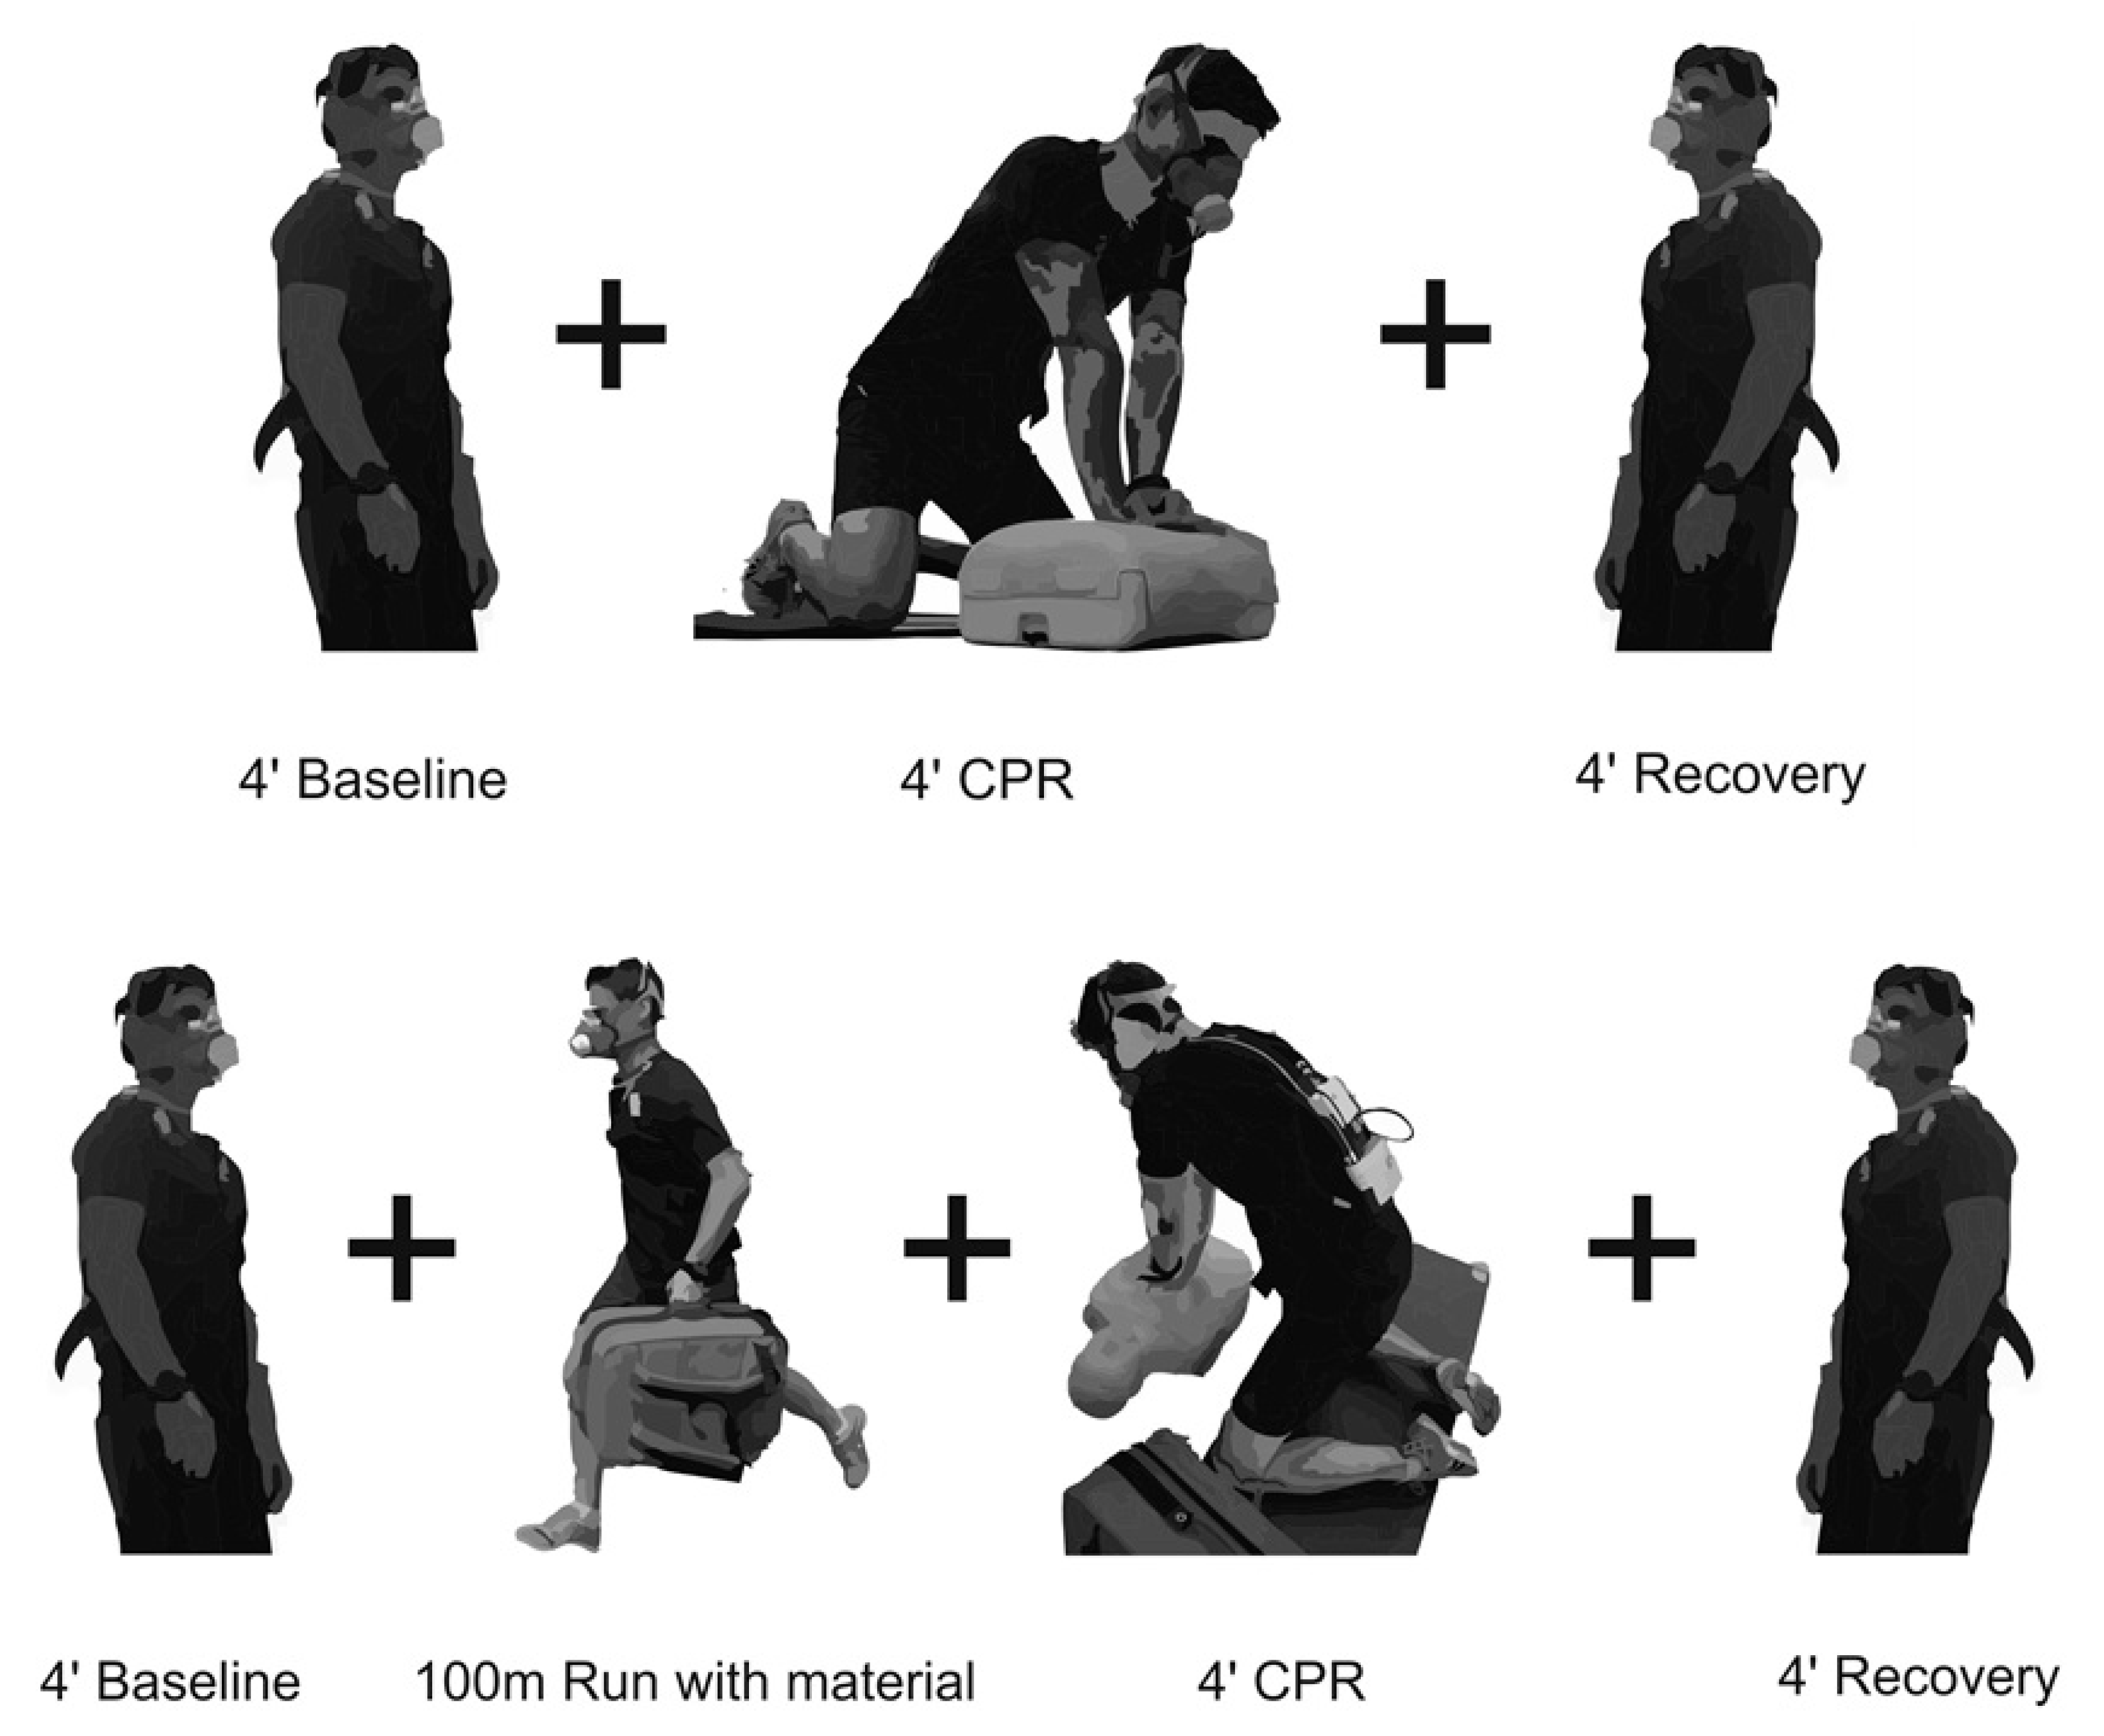 during cpr chest compression fraction should be